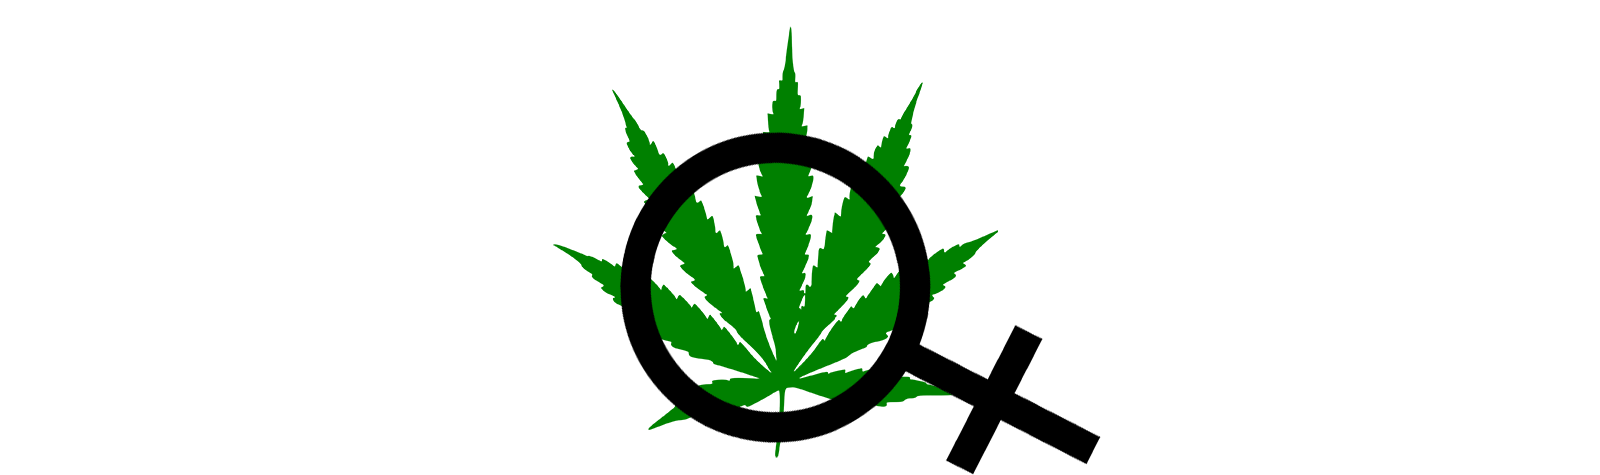 Networking Opportunity for Women In the Cannabis Industry